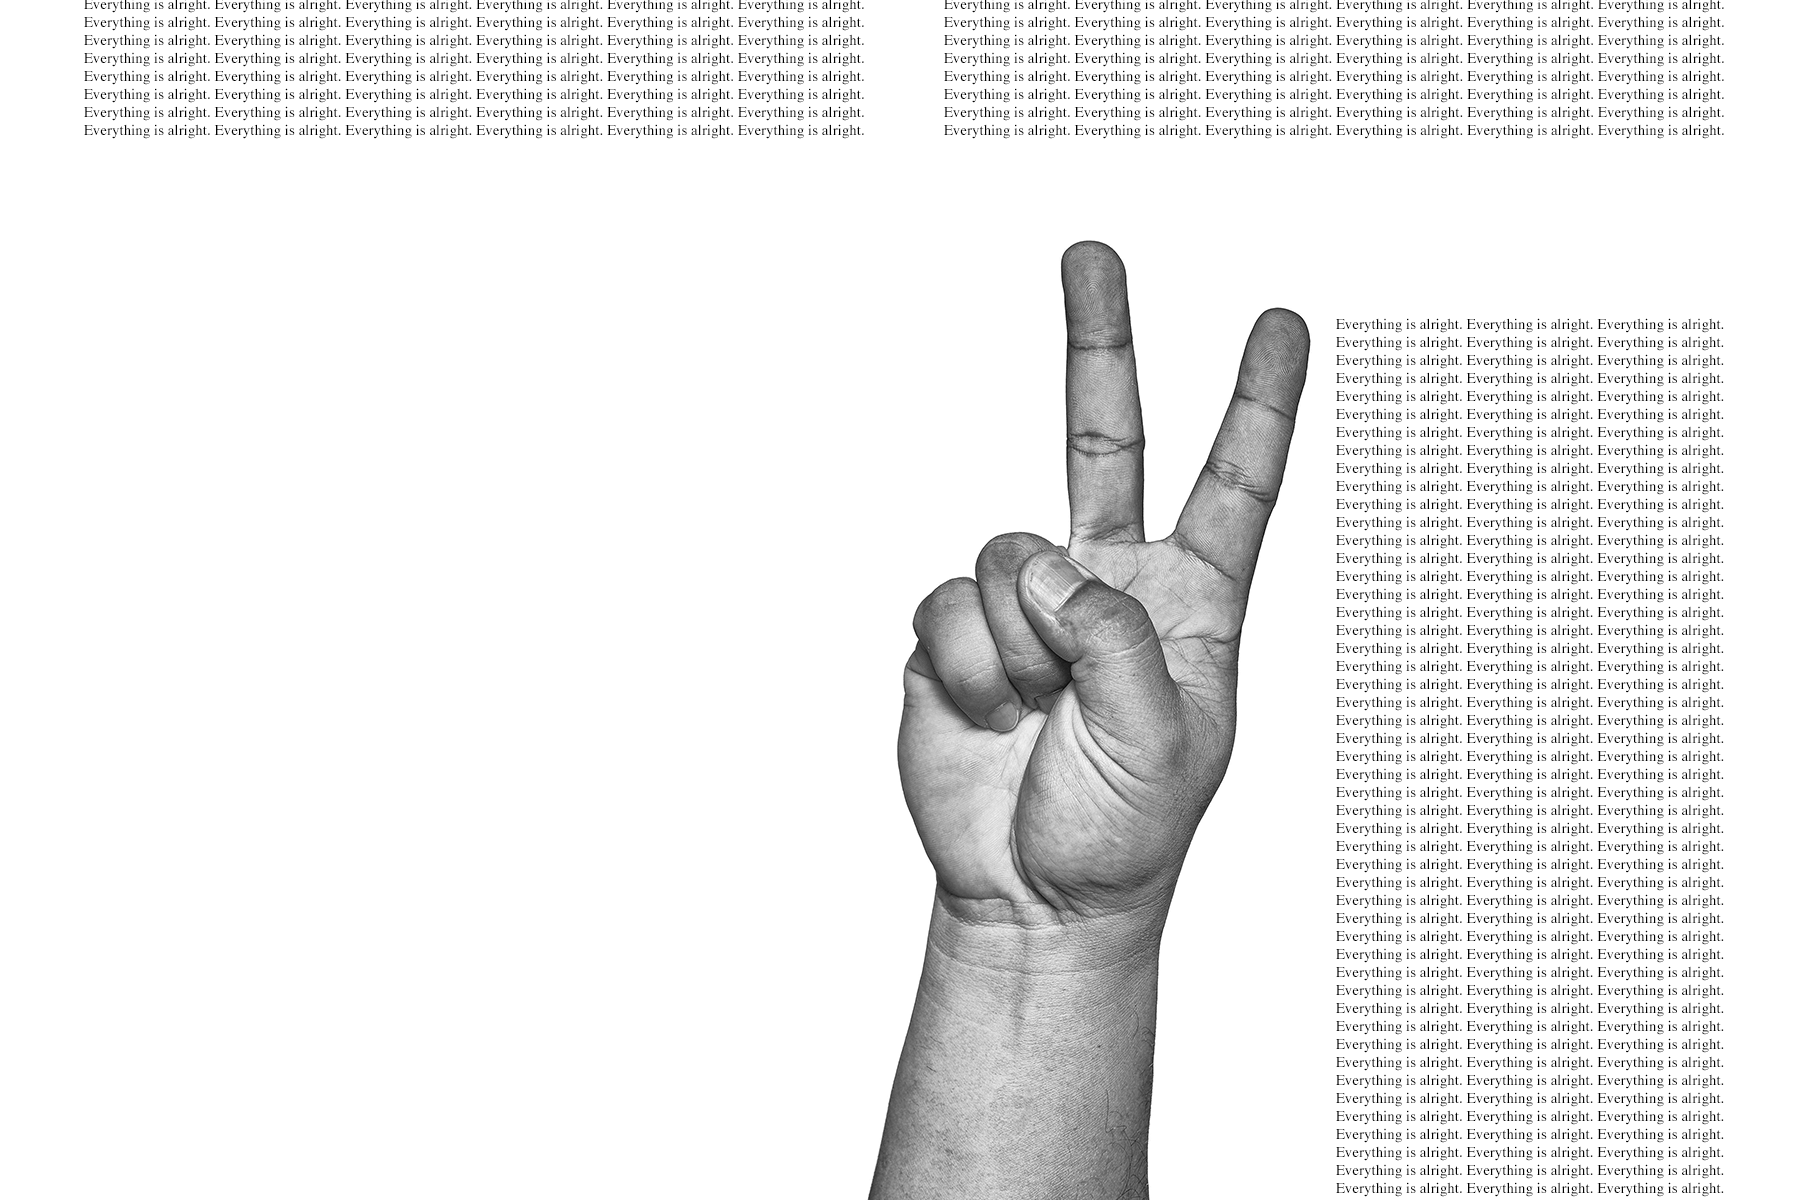 A hand doing the peace sign with the typewritten words: “Everything is alright” repeated many times.